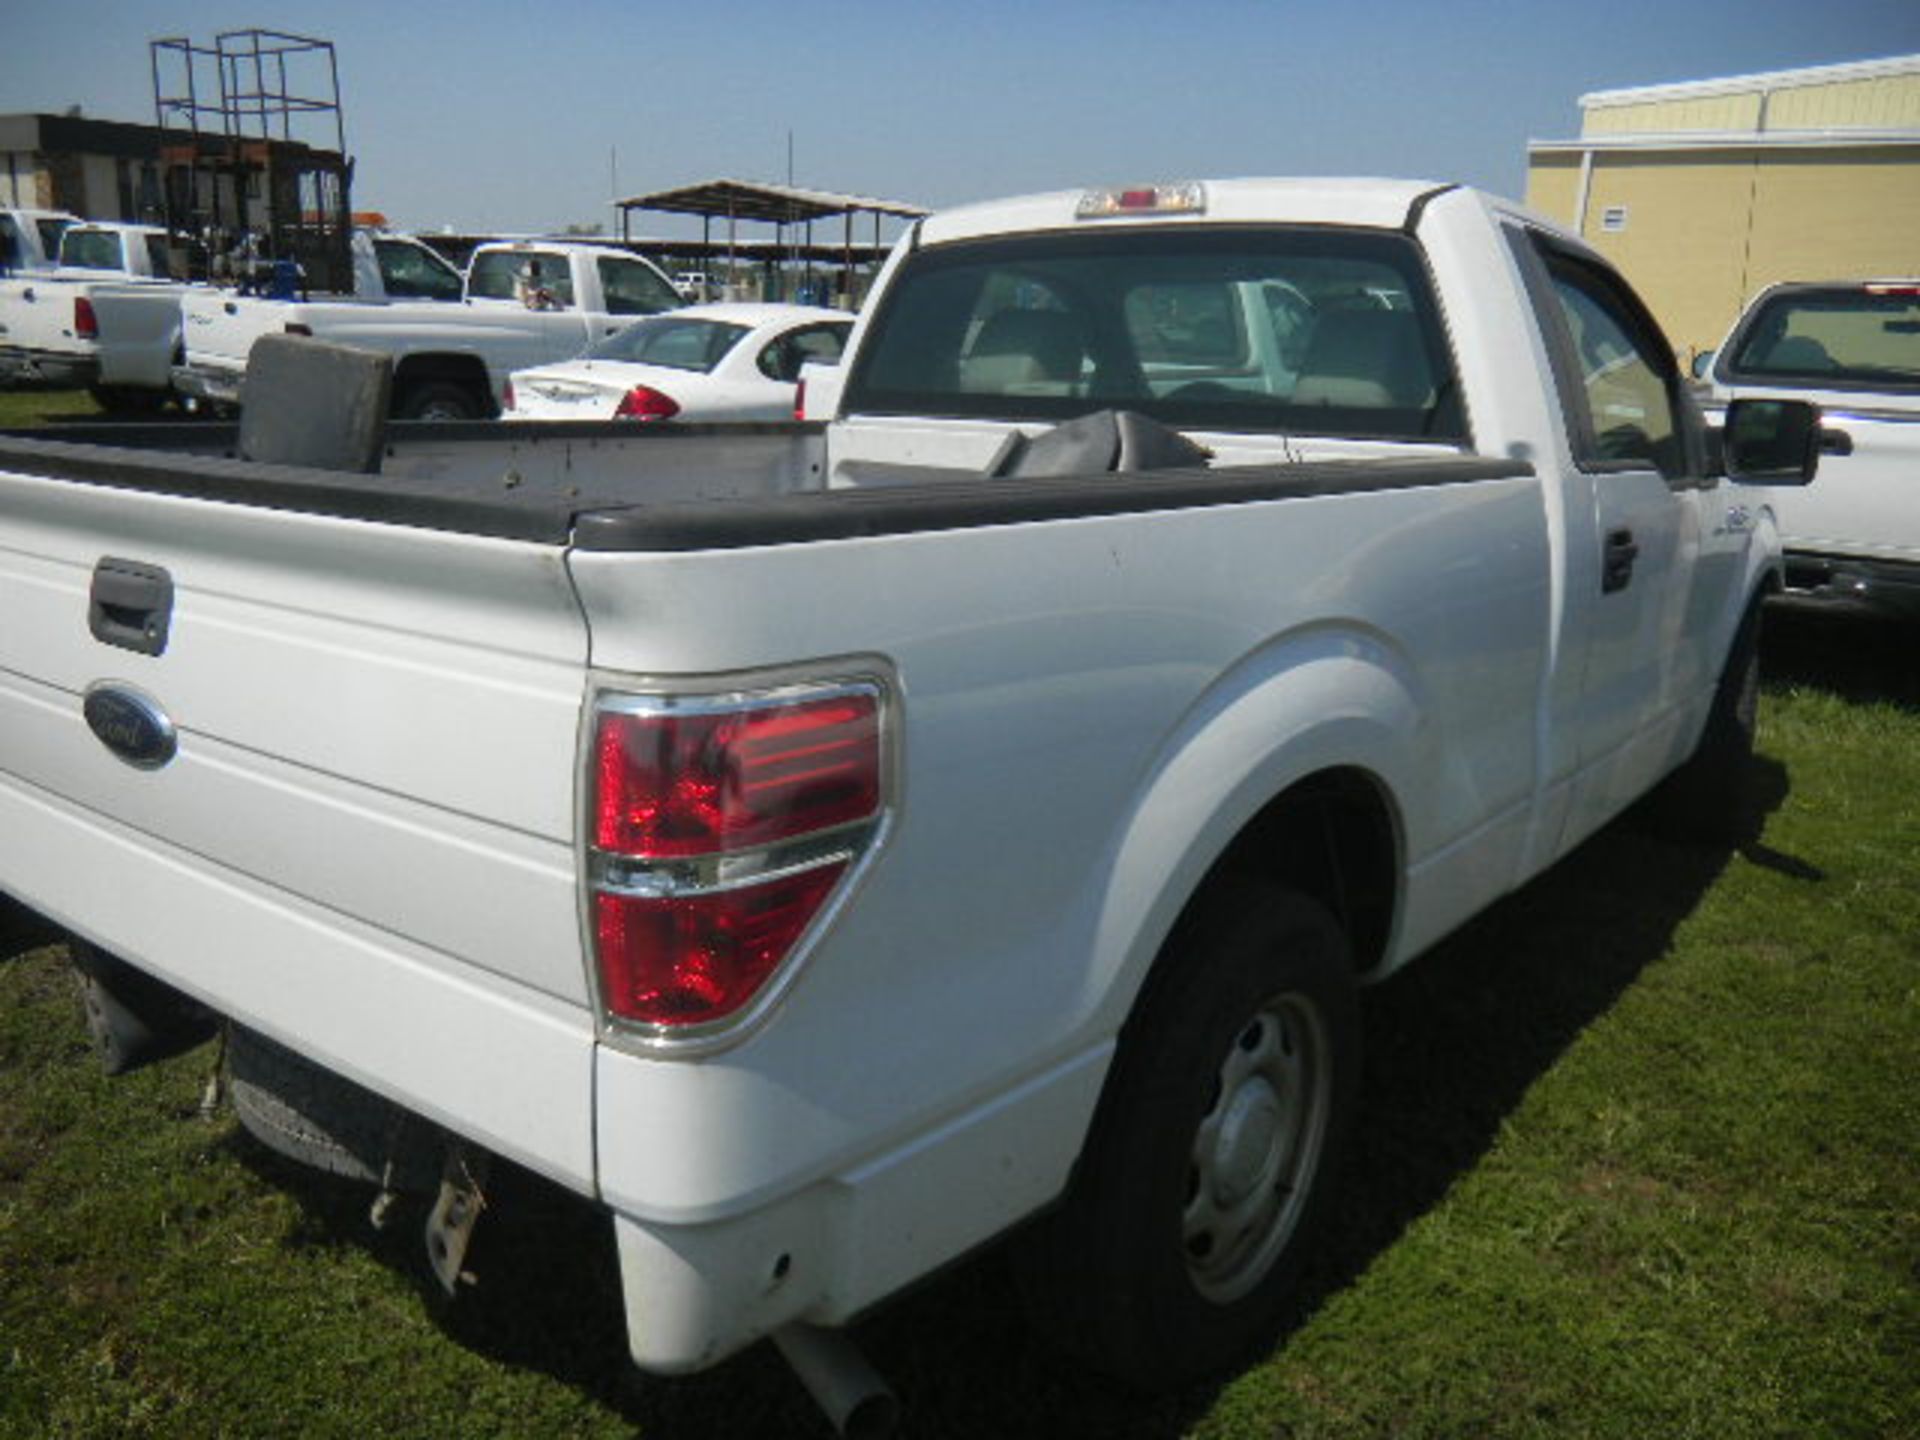 2010 Ford F-150XL White Pickup Truck - Asset I.D. #139 - Last of Vin (AKC53505) - Image 5 of 17